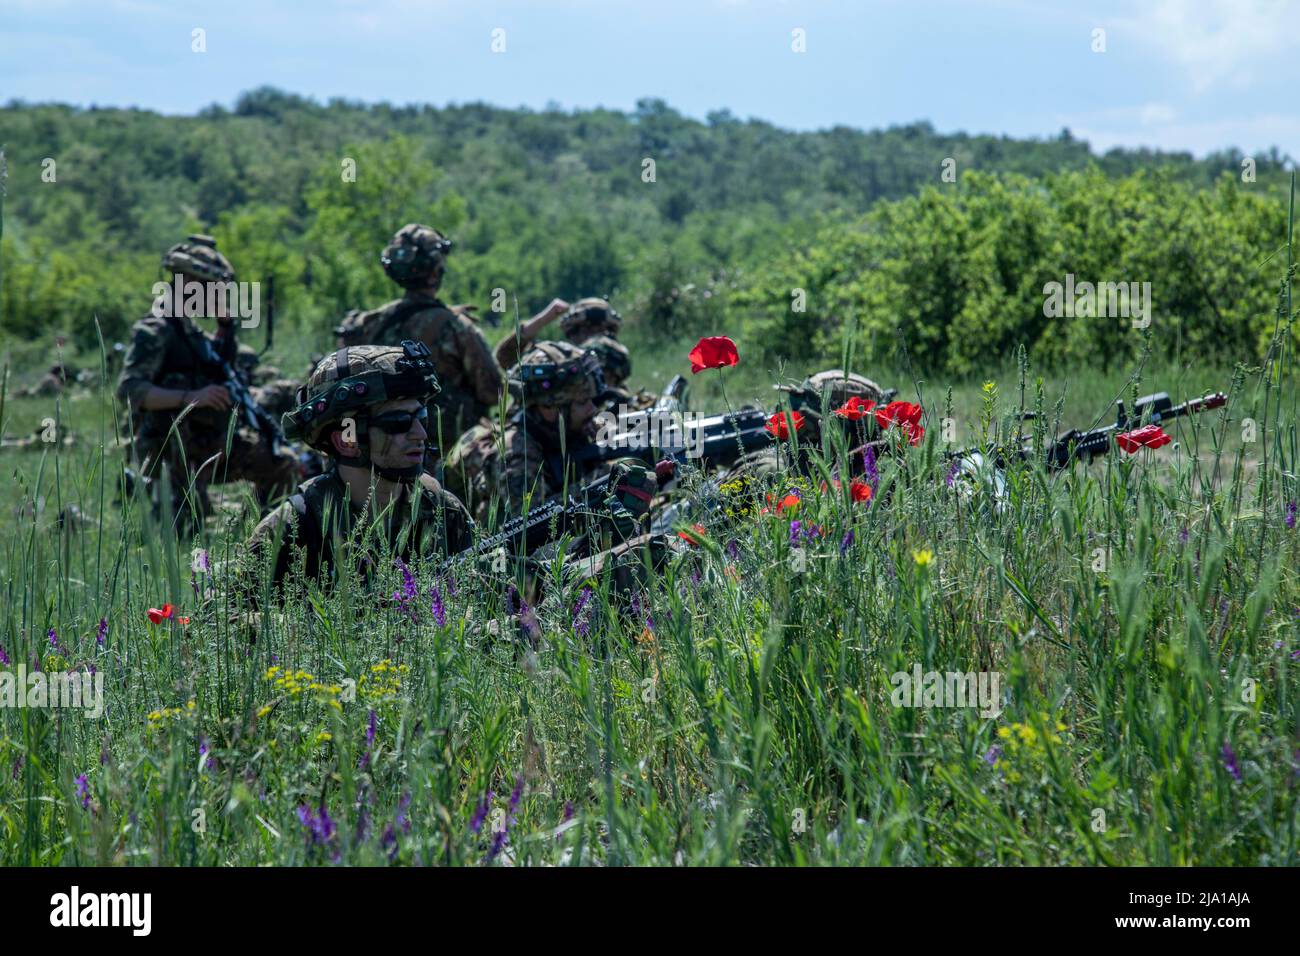 May 17, 2022 - Skopje, North Macedonia - 1st Air Cavalry Brigade conducts battalion-sized air assault training operation with the Italian Paratrooper Brigade 'FOLGORE' during Swift Response 2022, Skopje, North Macedonia, May 17, 2022. Exercise Swift Response 2022 is an annual multinational training exercise, which takes place in Eastern Europe, the Arctic High North, Baltics, and Balkans from May 2-20, 2022. It aims to present combat credible Army forces in Europe and Africa and enhance readiness by building airborne interoperability with Allies and Partners and the integration of joint servic Stock Photo